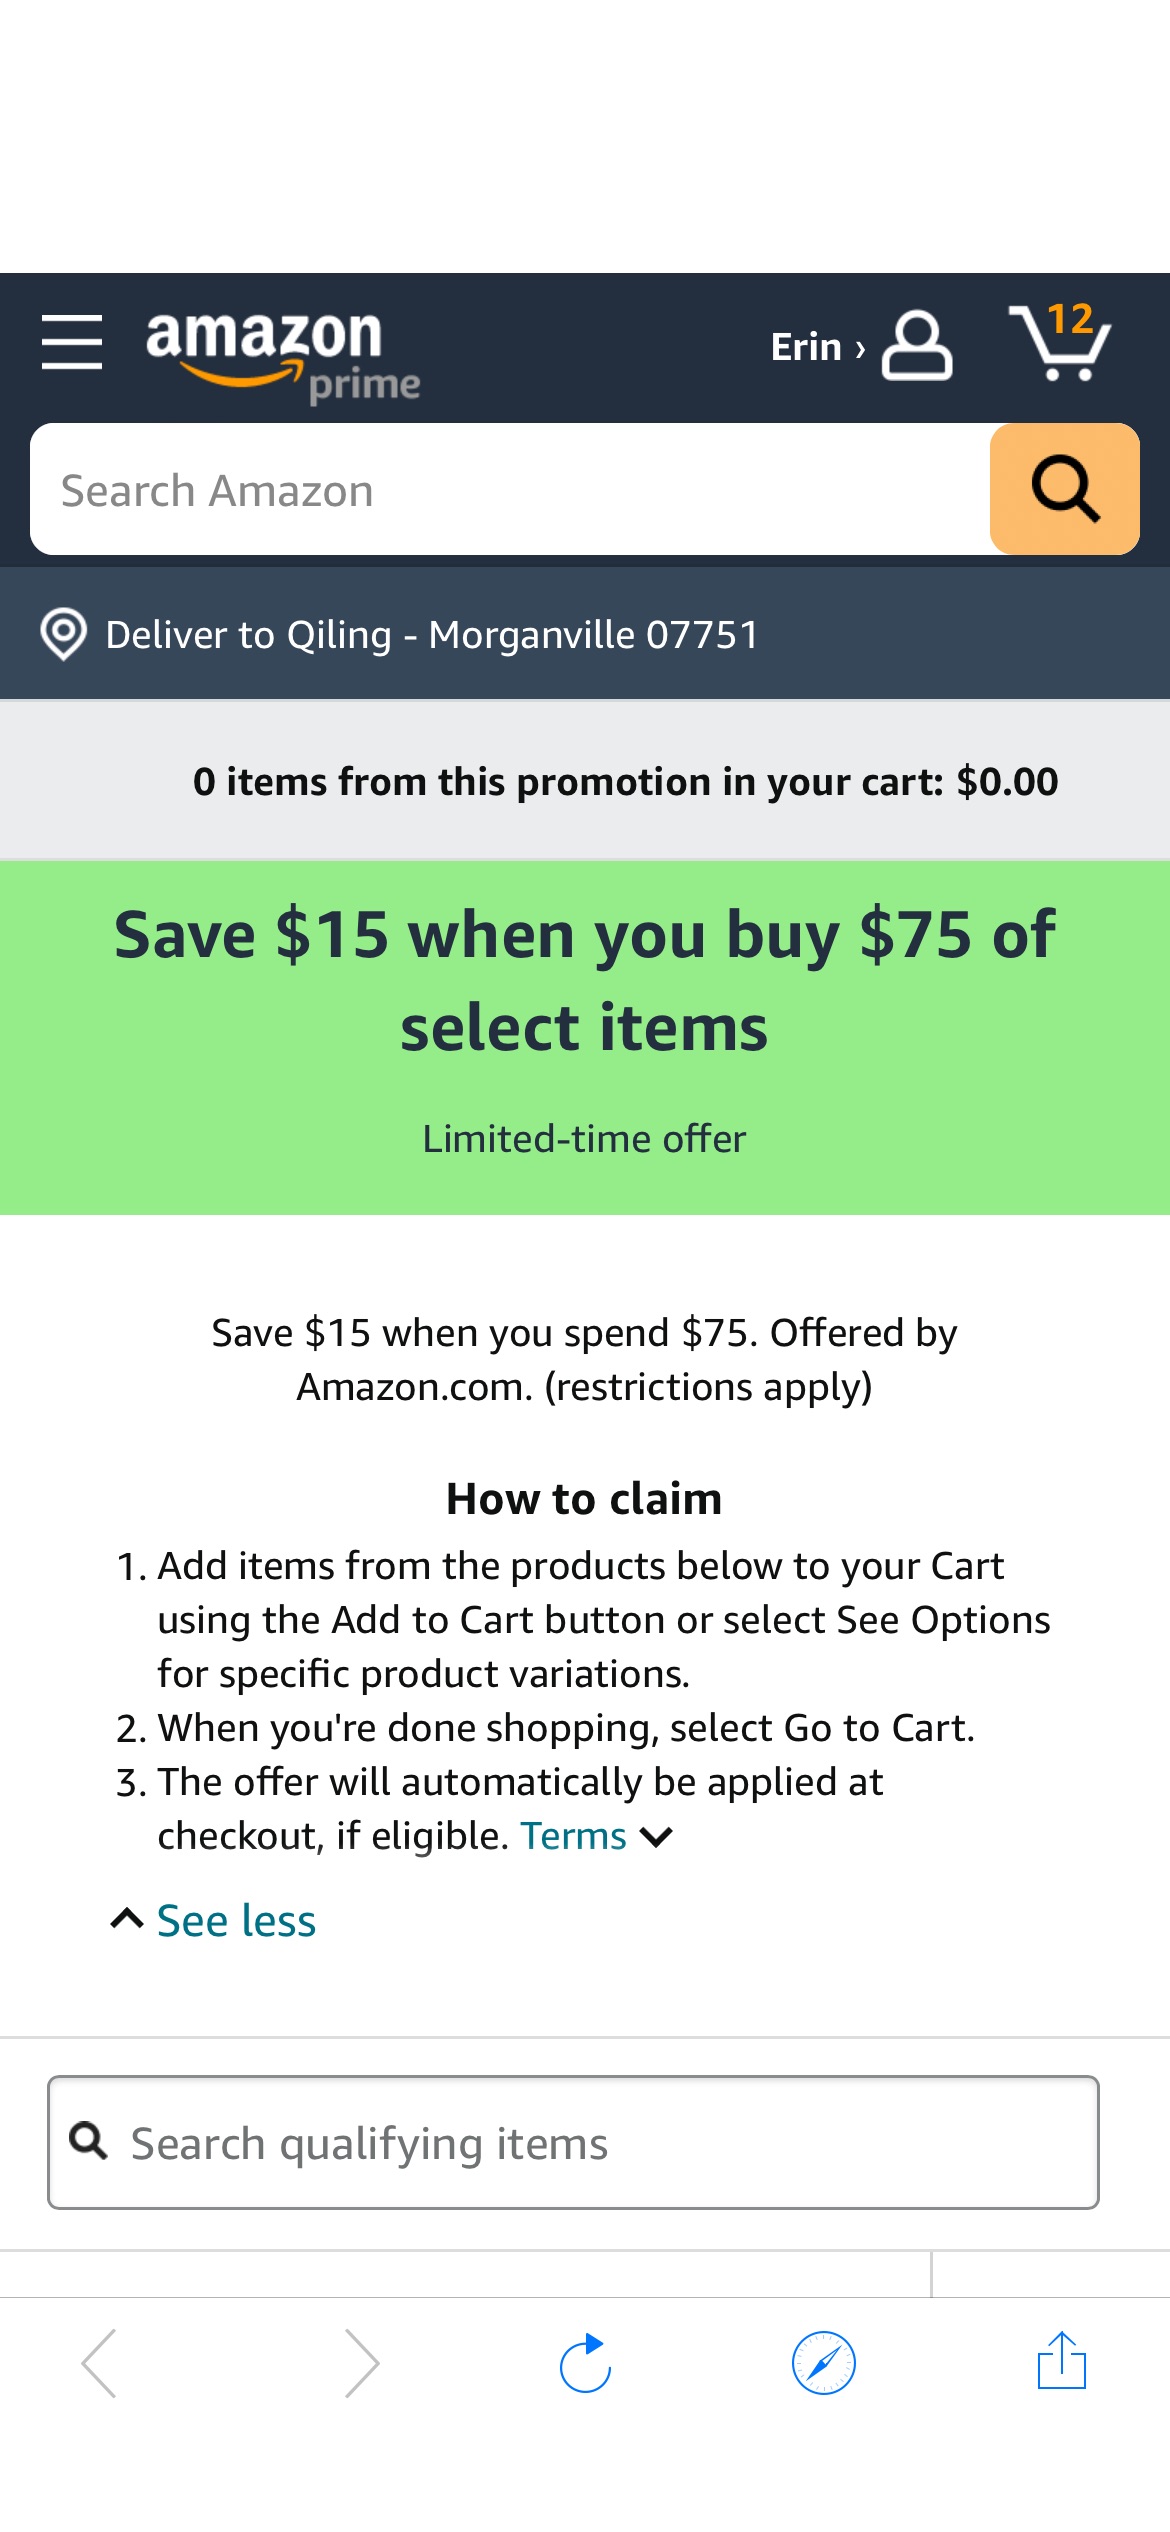 Amazon.com: Save $15 when you buy $75 of select items promotion